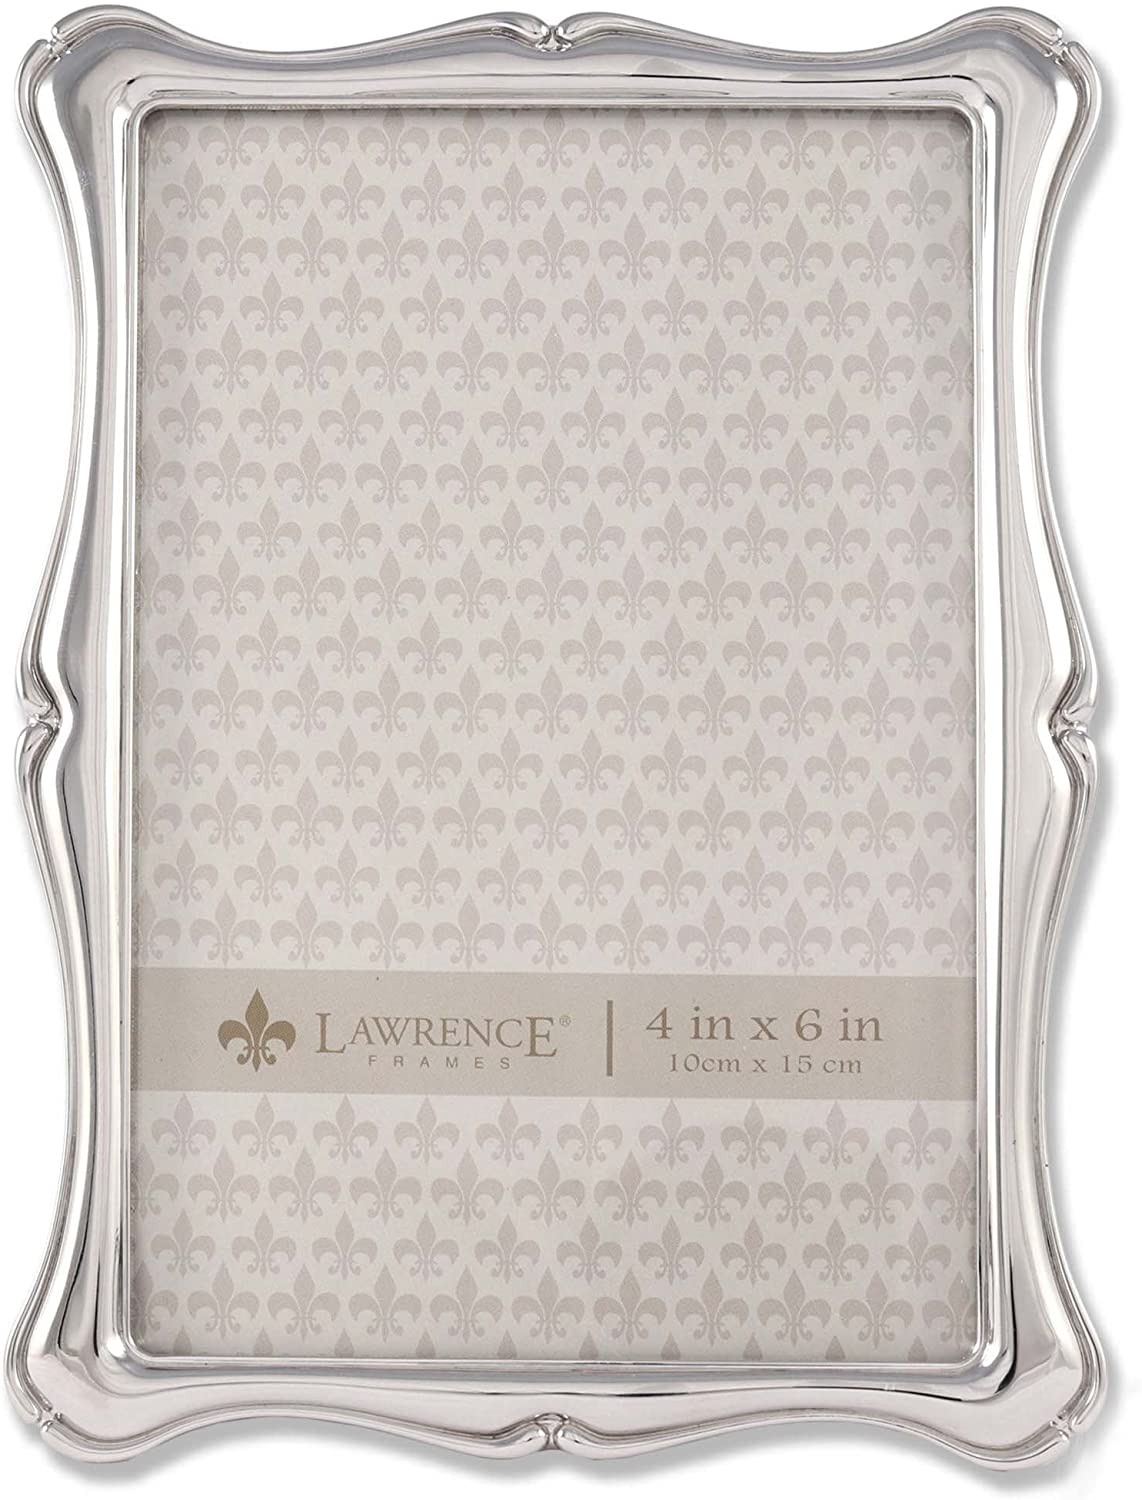 Lawrence Frames 710280 5 by 7-Inch Silver Metal Romance Picture Frame, 8 by 10-Inch Matted